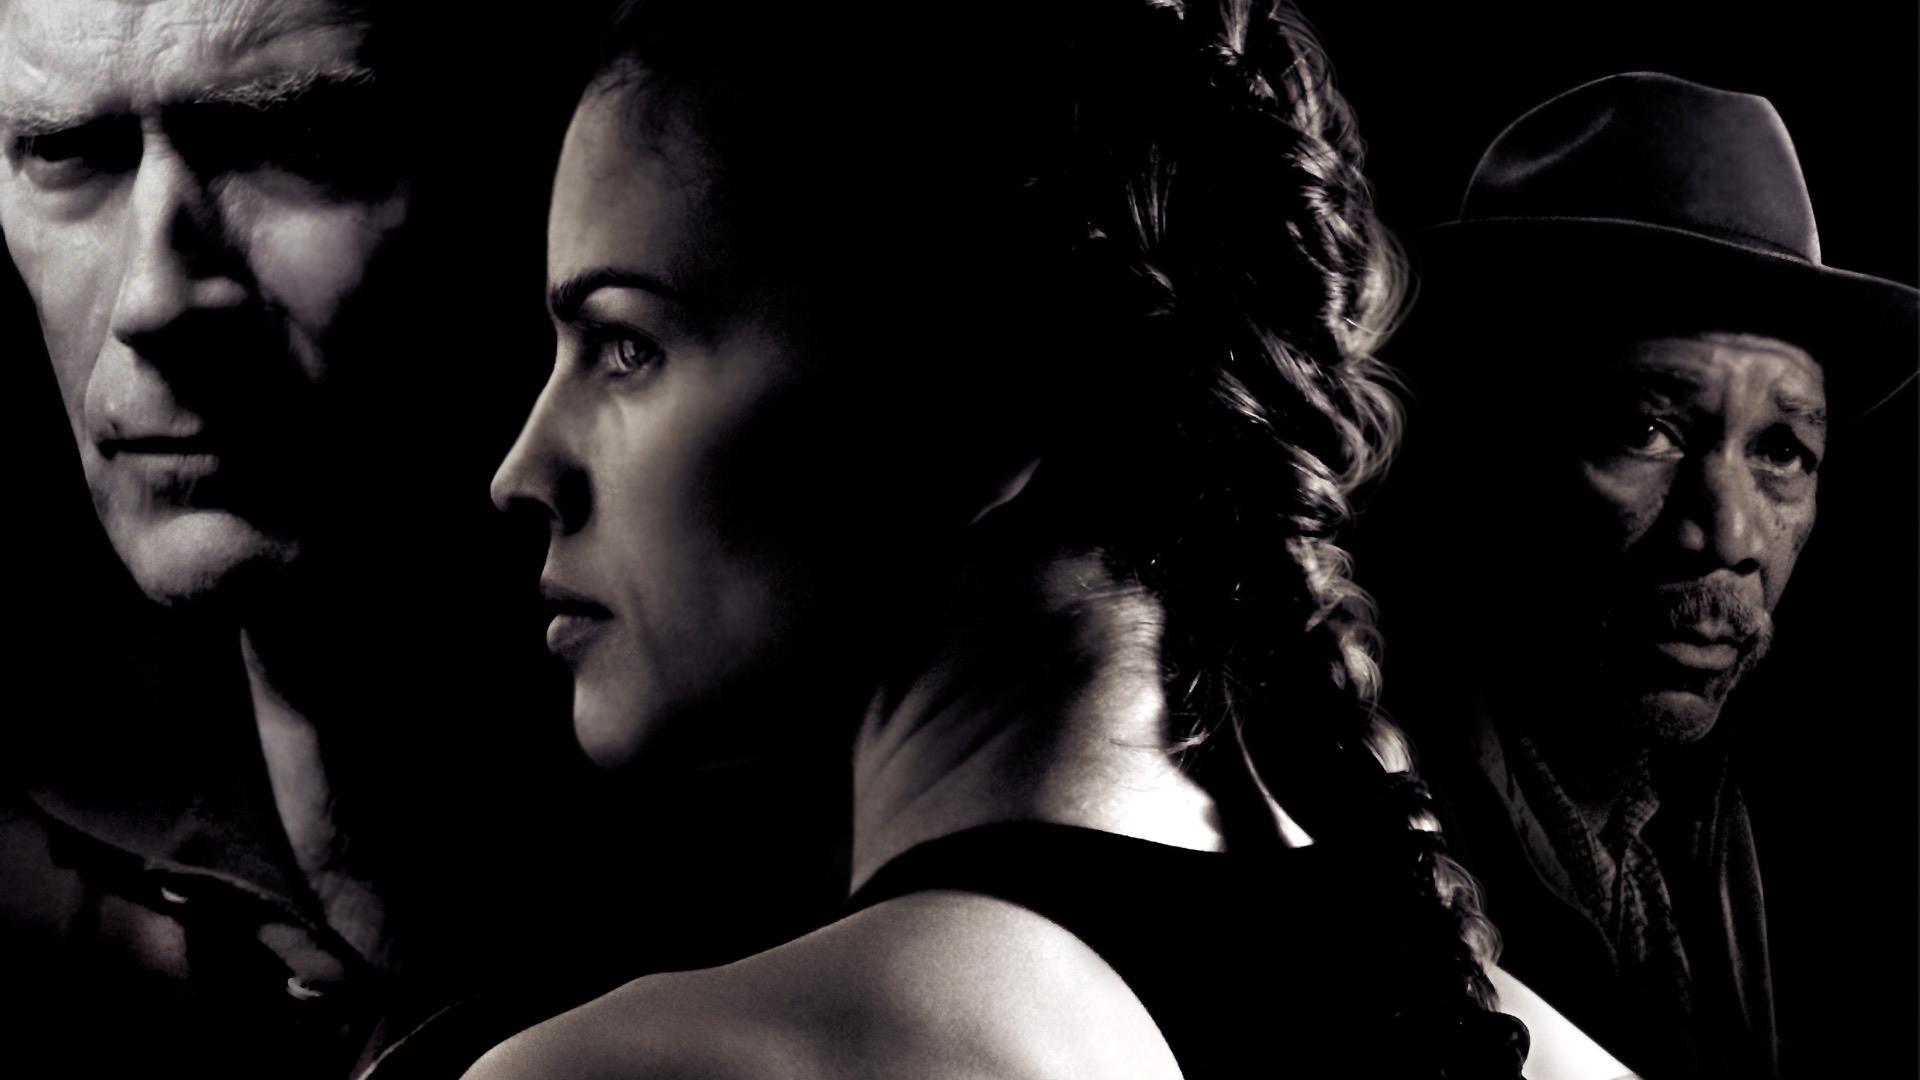 Million Dollar Baby 21918 Hd Wallpapers in Movies   Imagescicom